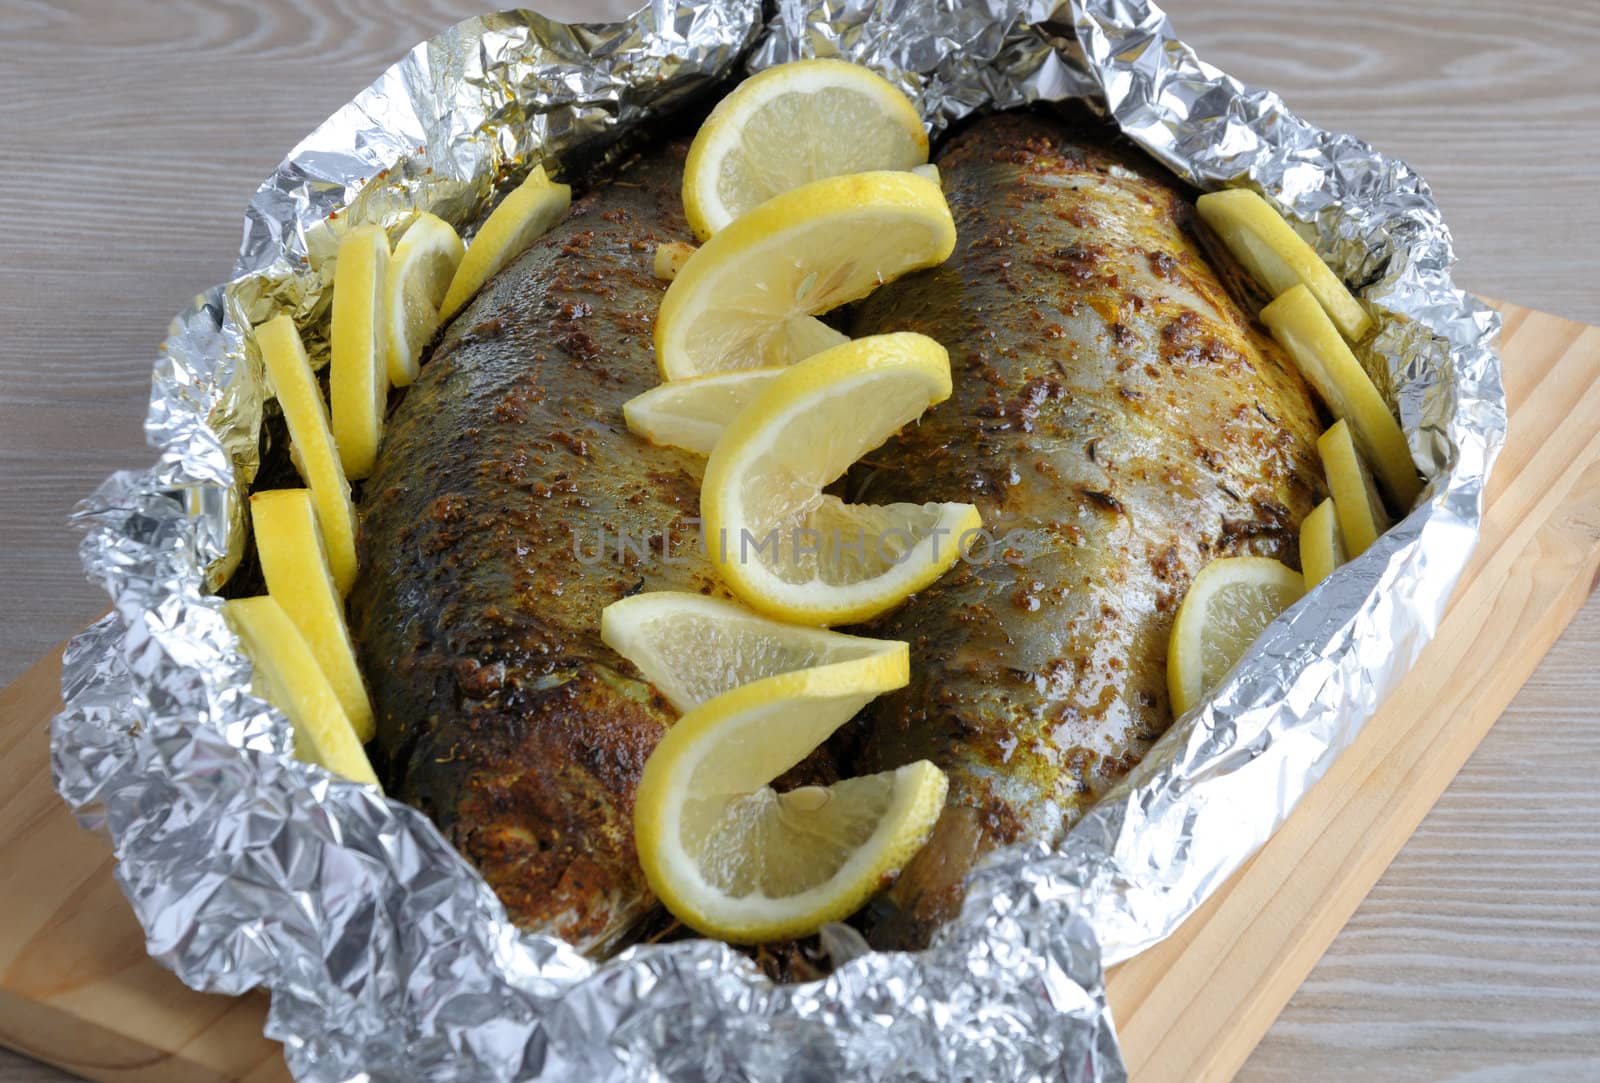 Baked herring in spices and herbs in foil with lemon